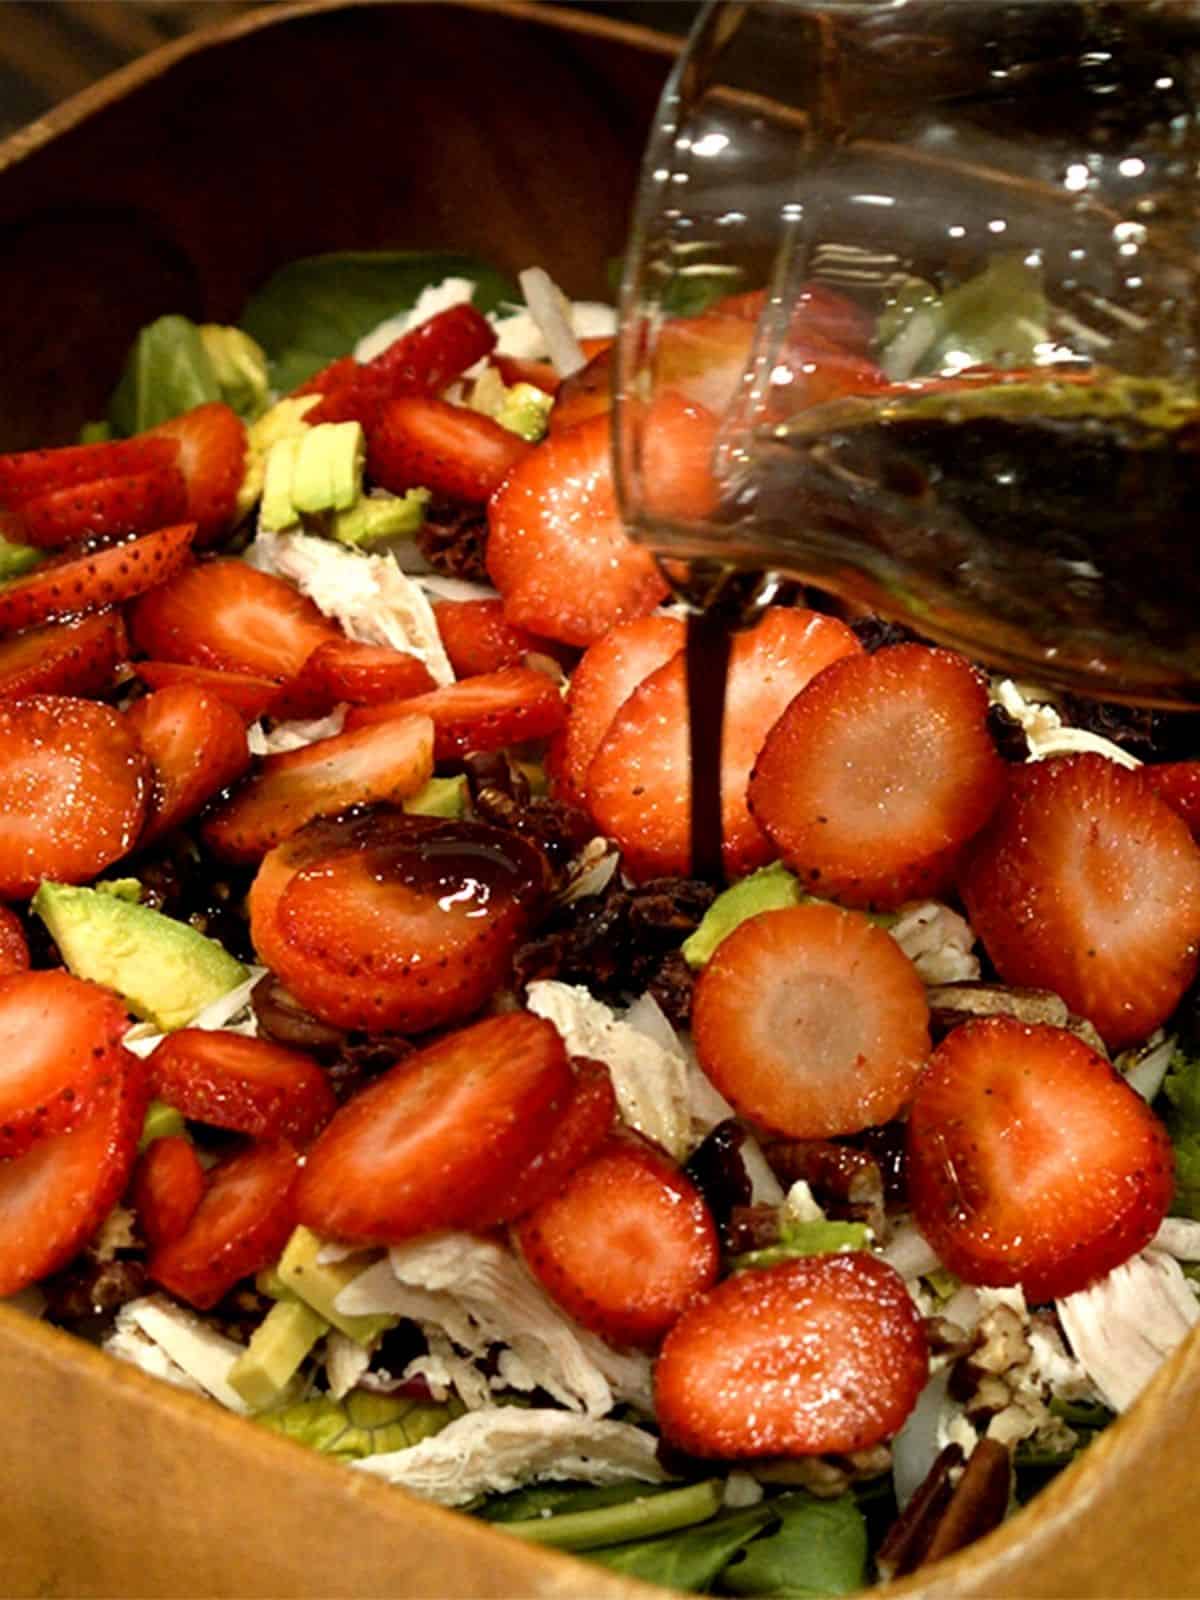 honey balsamic dressing being poured onto salad